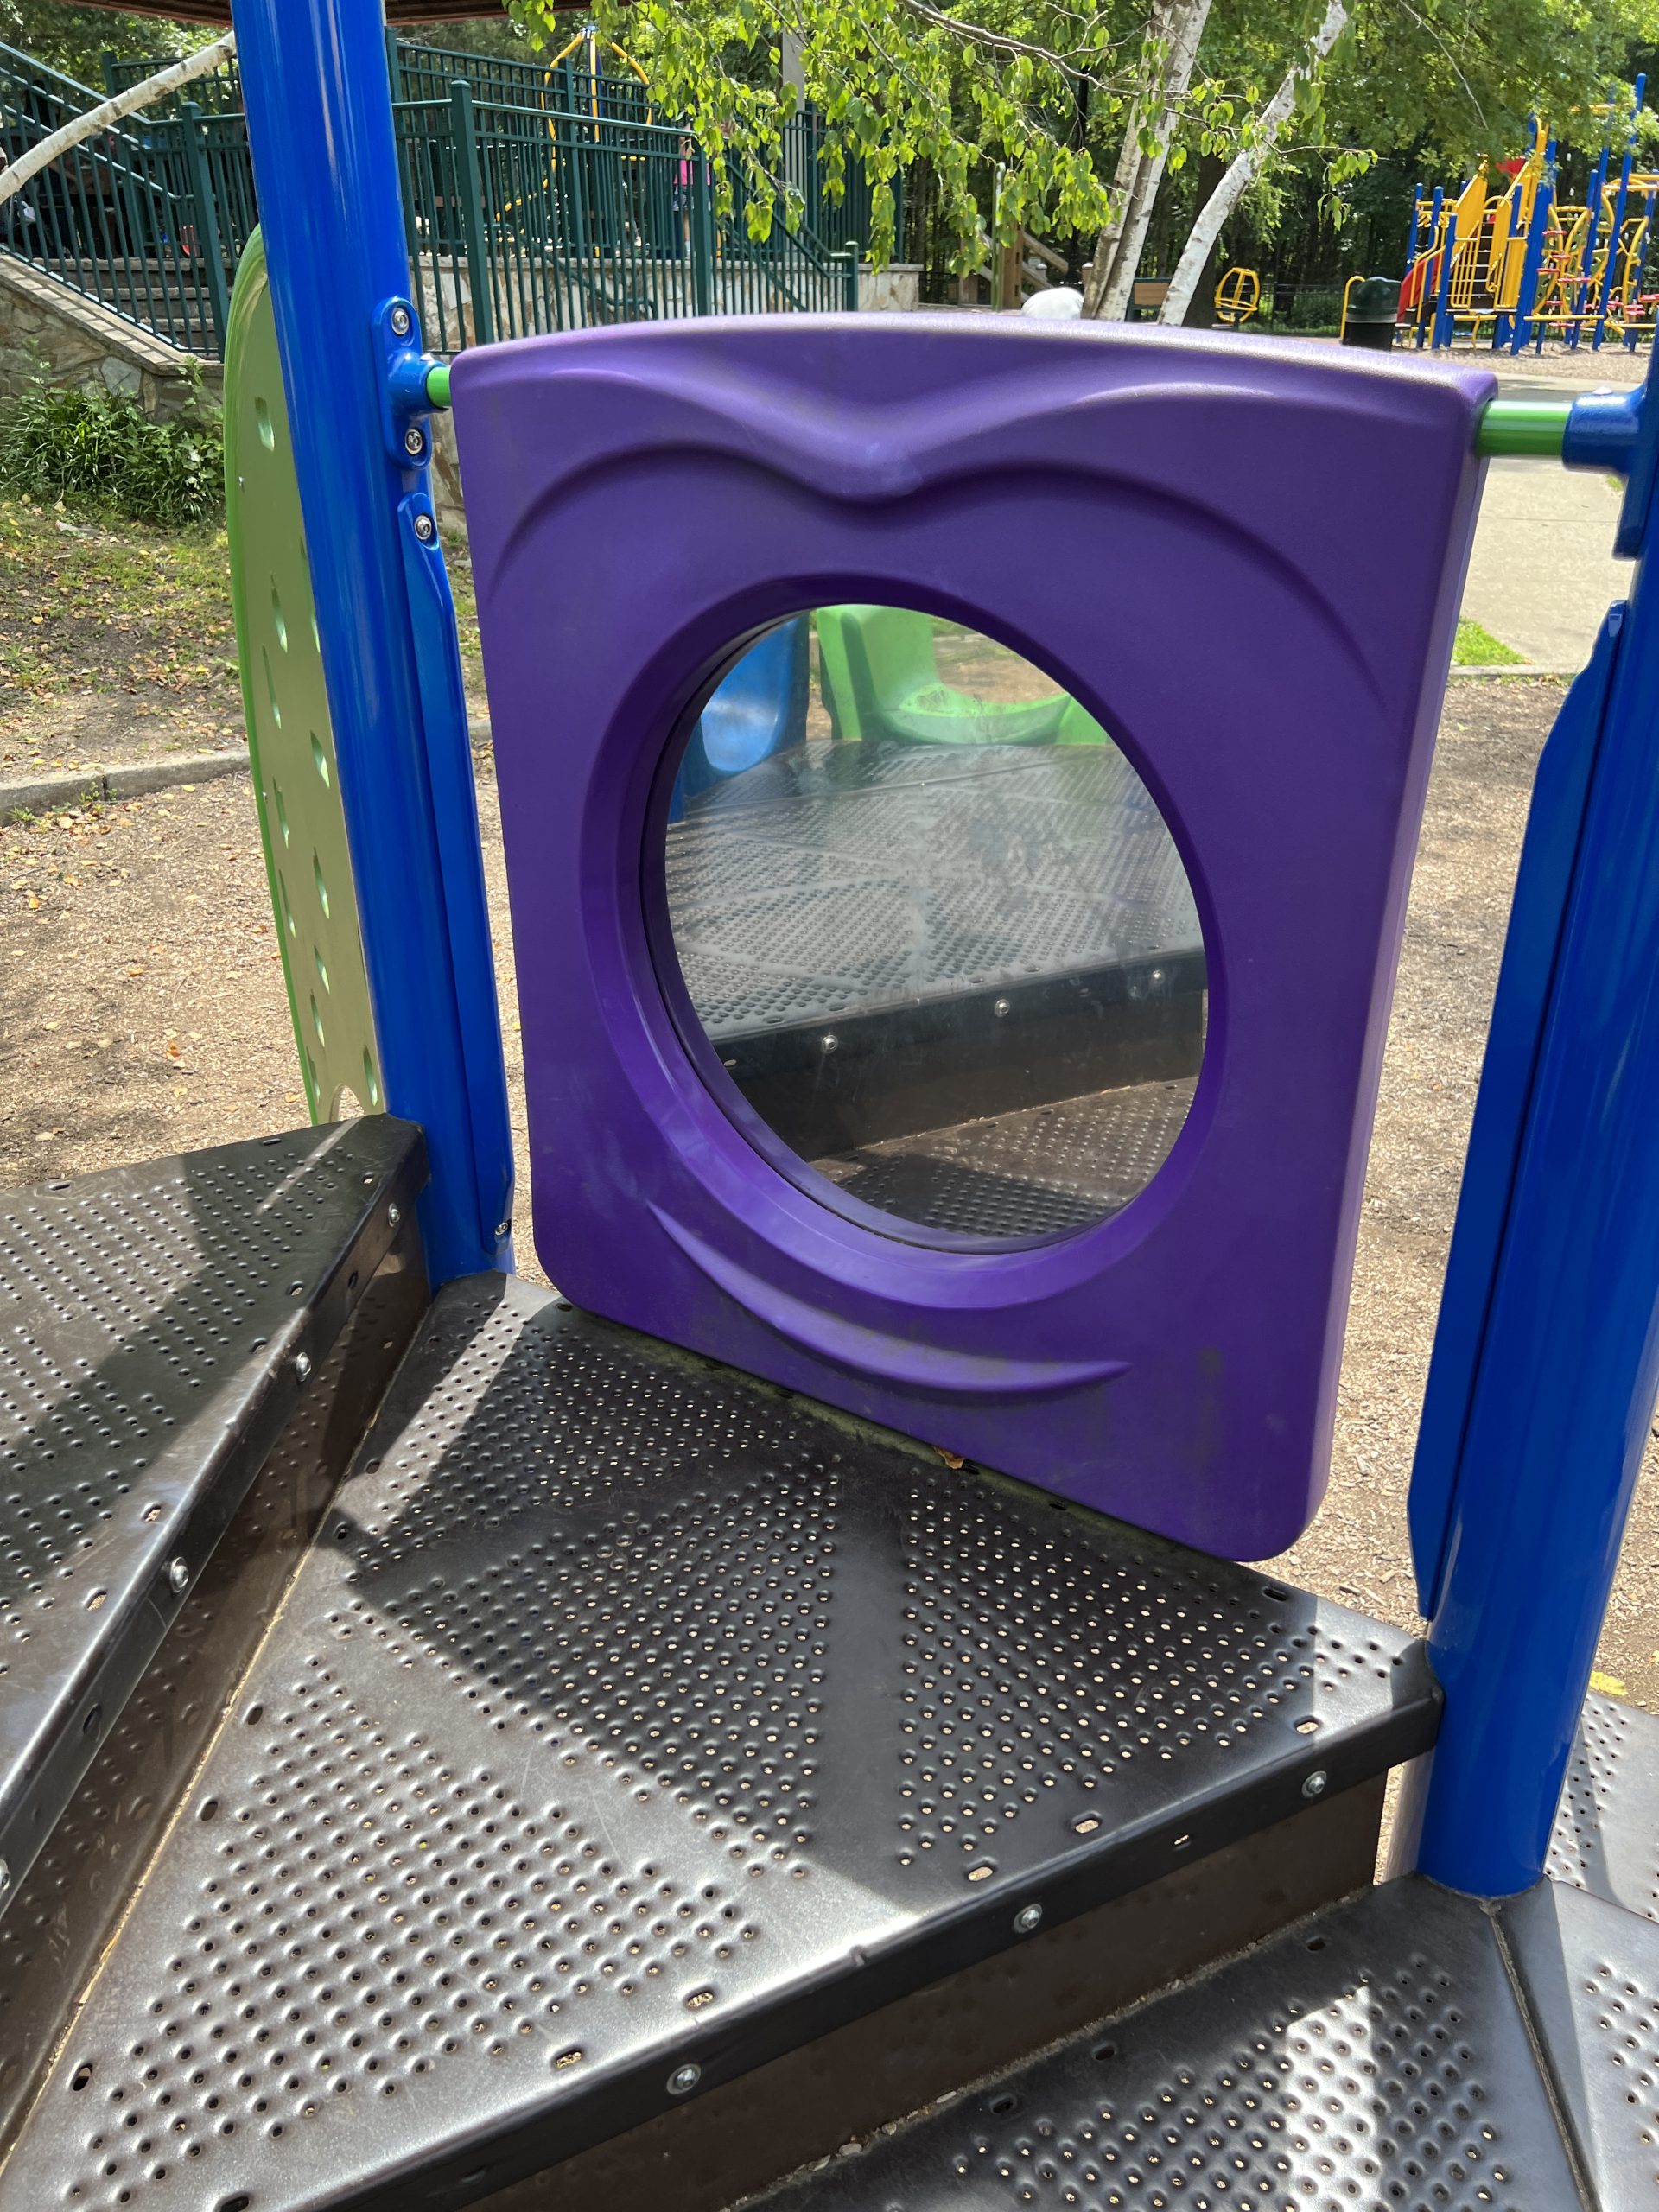 Blue and Green accessible playground - SENSORY PLAY mirror - at Montville Community Playground in Montville NJ